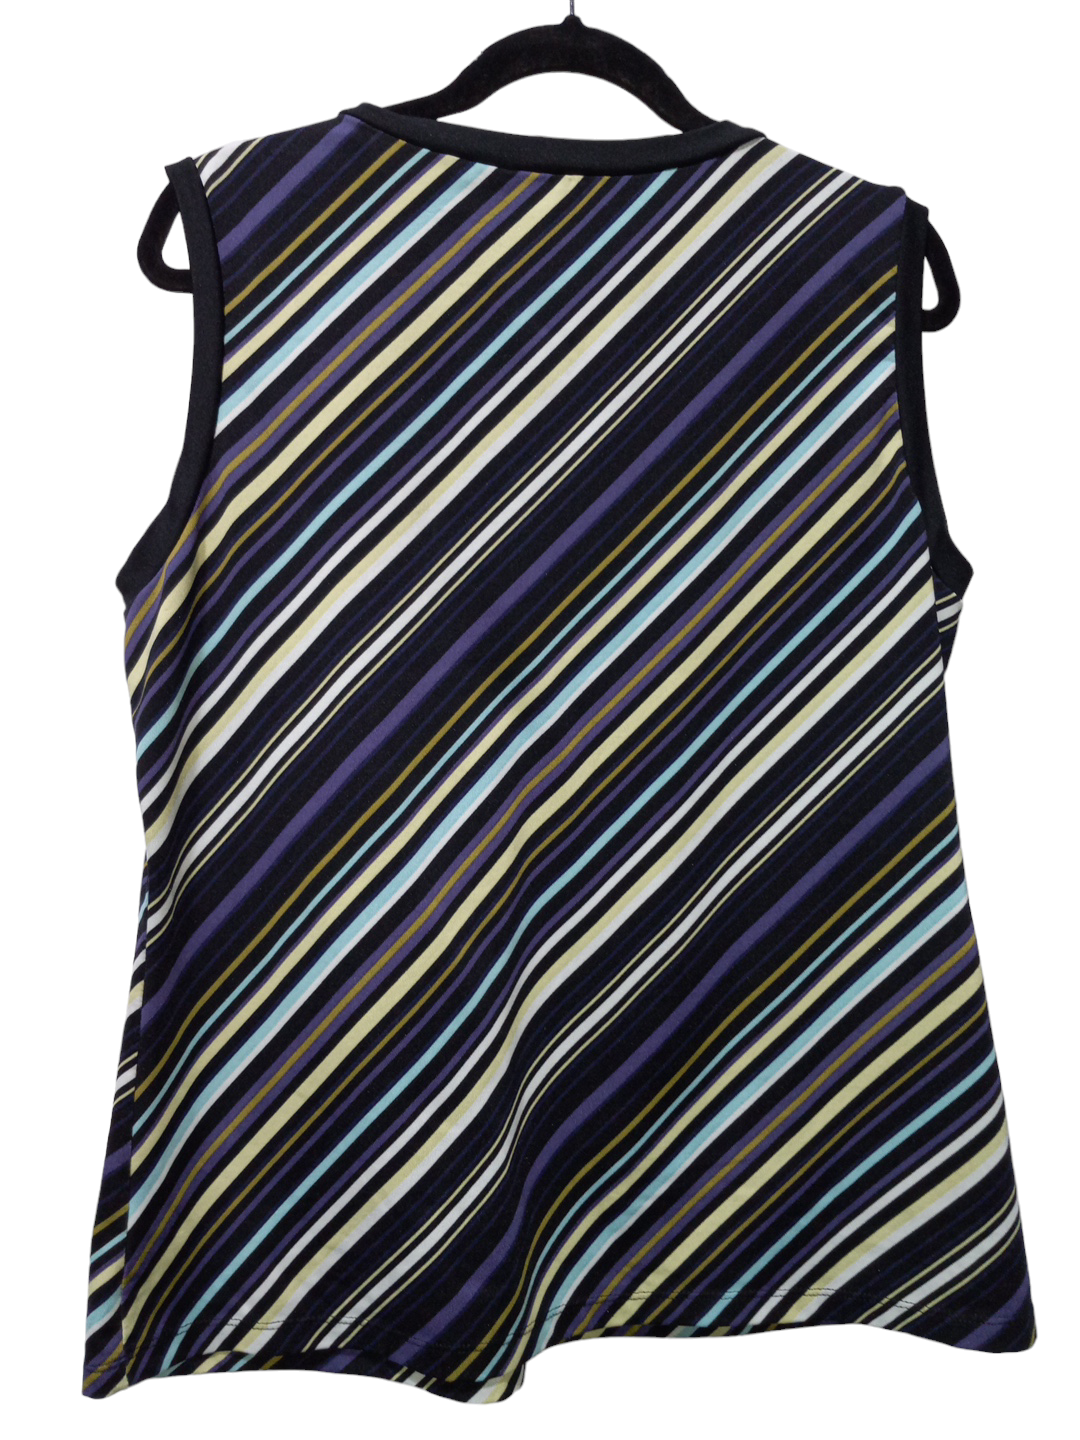 Striped Pattern Blouse Sleeveless New York And Co, Size Xl